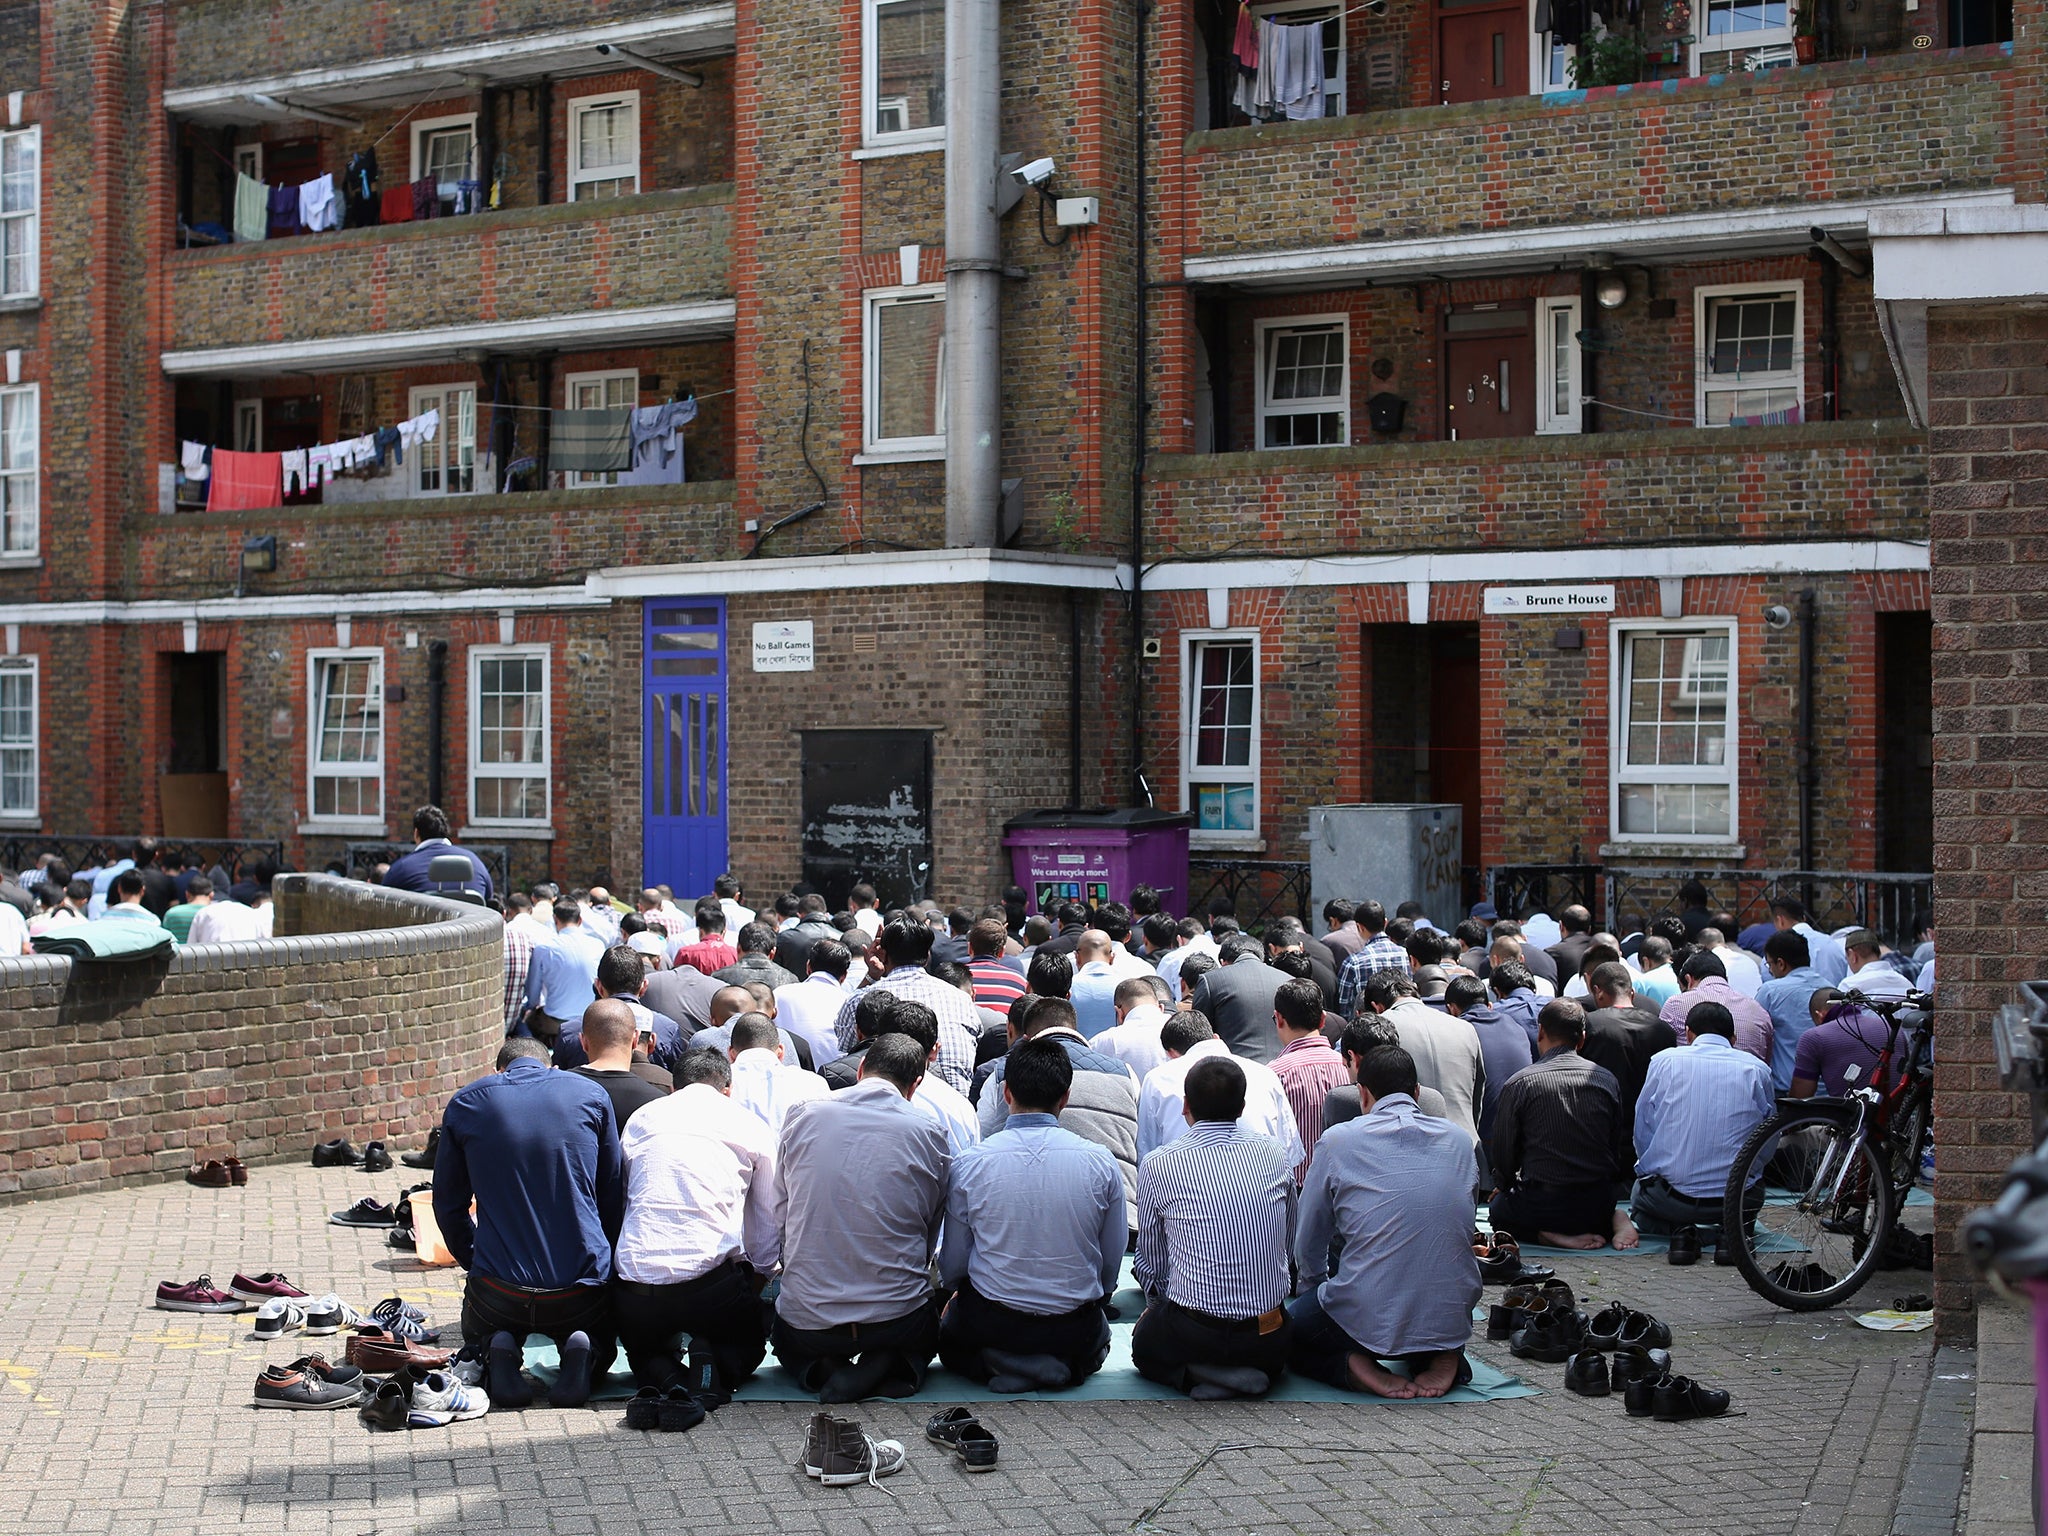 Muslims perform the Friday prayer during Ramadan on the Brune Estate in London in 2013. David Cameron acknowledged many young Muslims feel alienated from wider British society